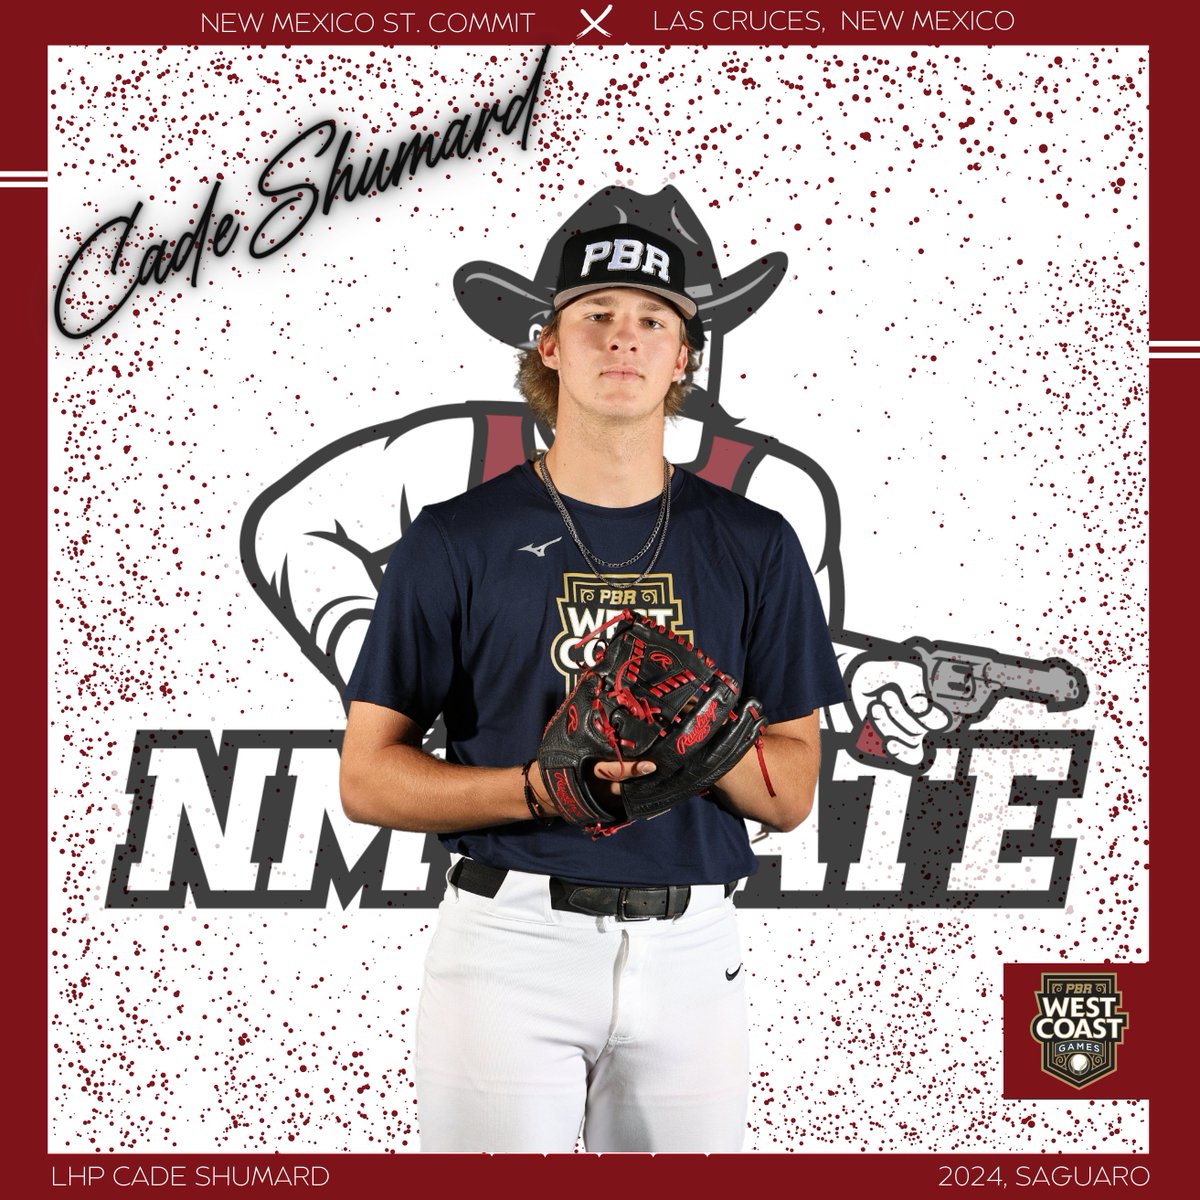 🚨𝐂𝐎𝐌𝐌𝐈𝐓𝐌𝐄𝐍𝐓 𝐀𝐋𝐄𝐑𝐓🚨 '24 LHP Cade Shumard (Saguaro) has announced his commitment to New Mexico State. Shumard was one of the top arms last month at the West Coast Games and is our third commitment from the event. 👤 loom.ly/HqmuR4g || @CadeShumard